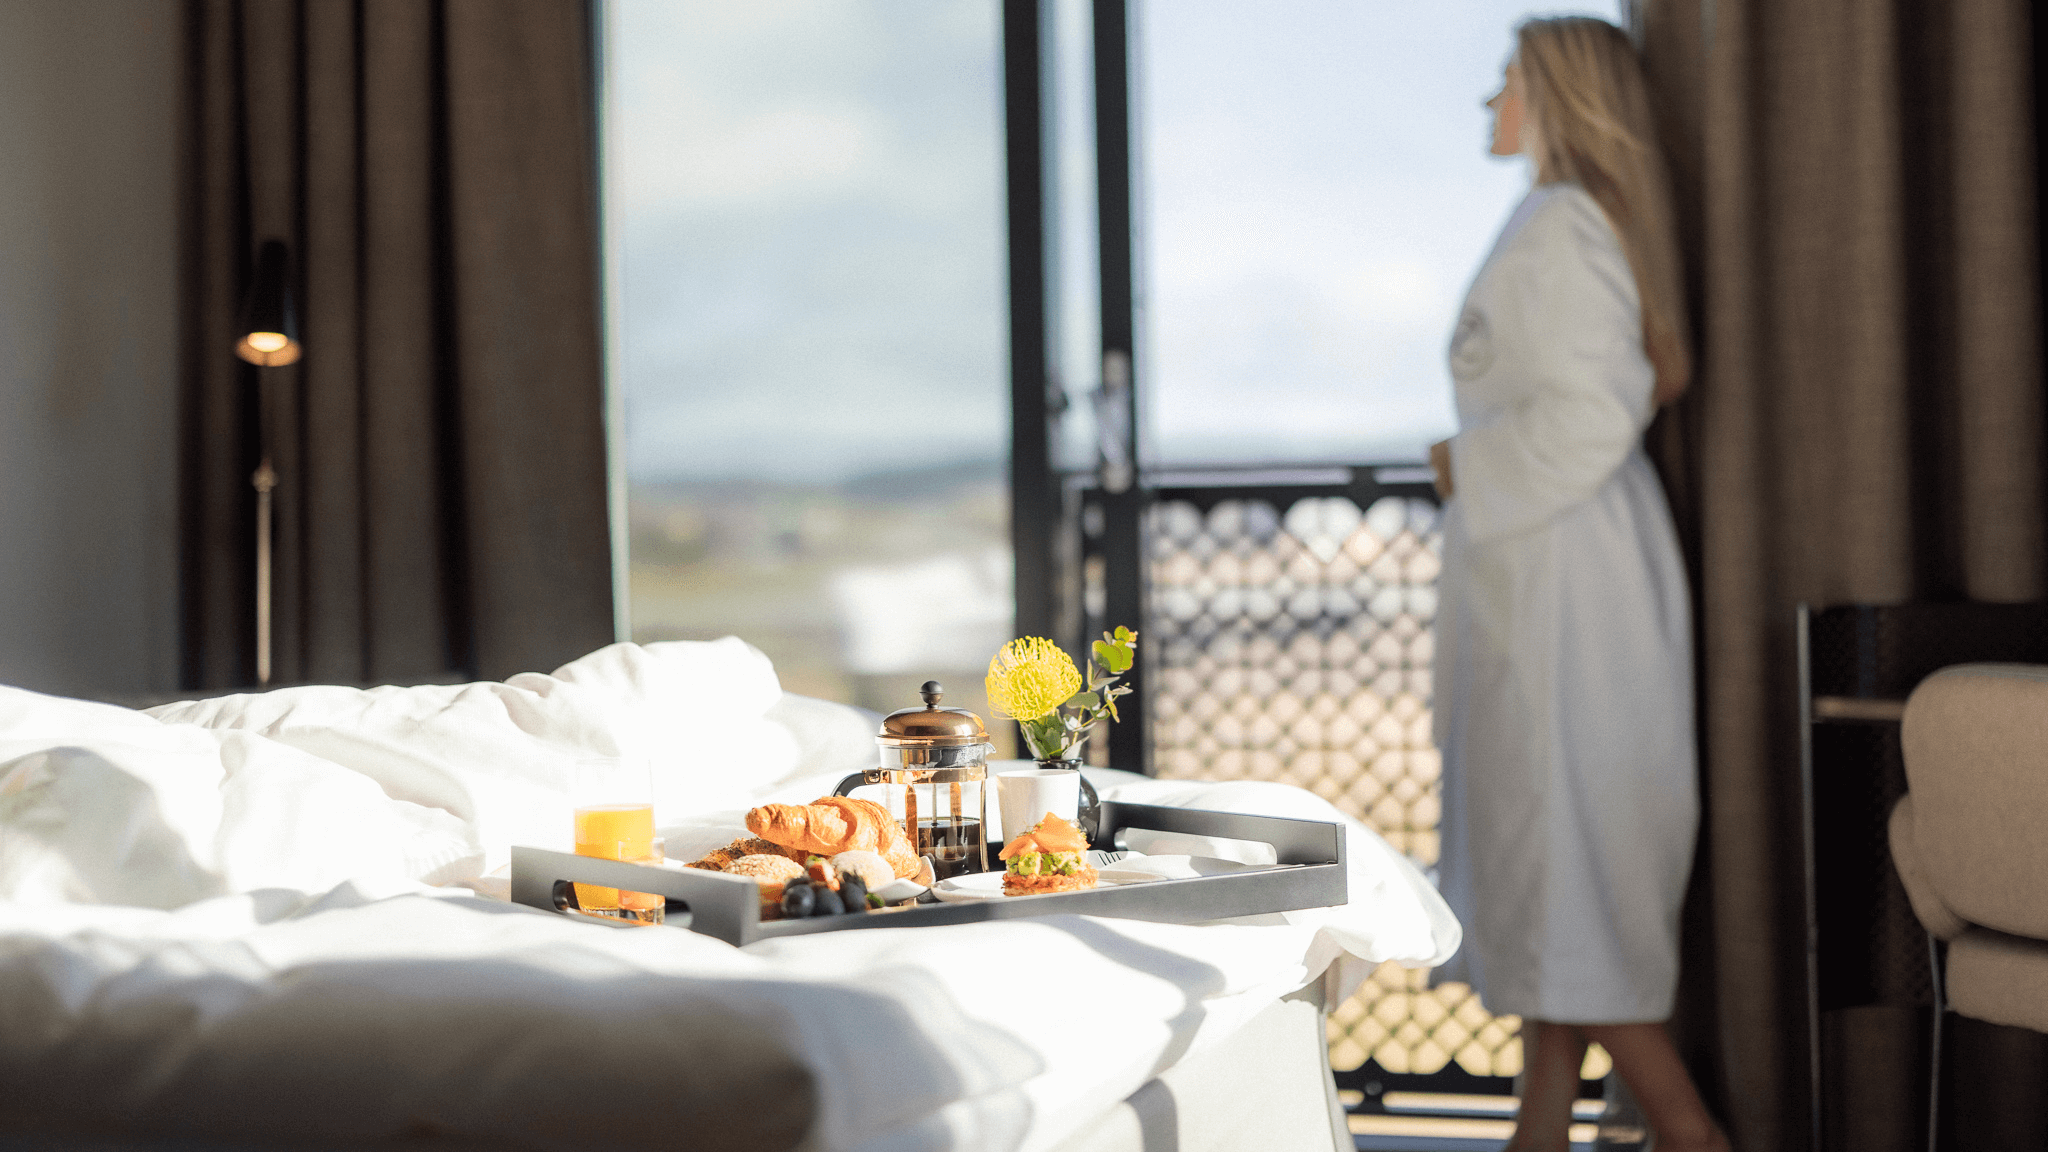 Breakfast in bed at Lily Country Club.